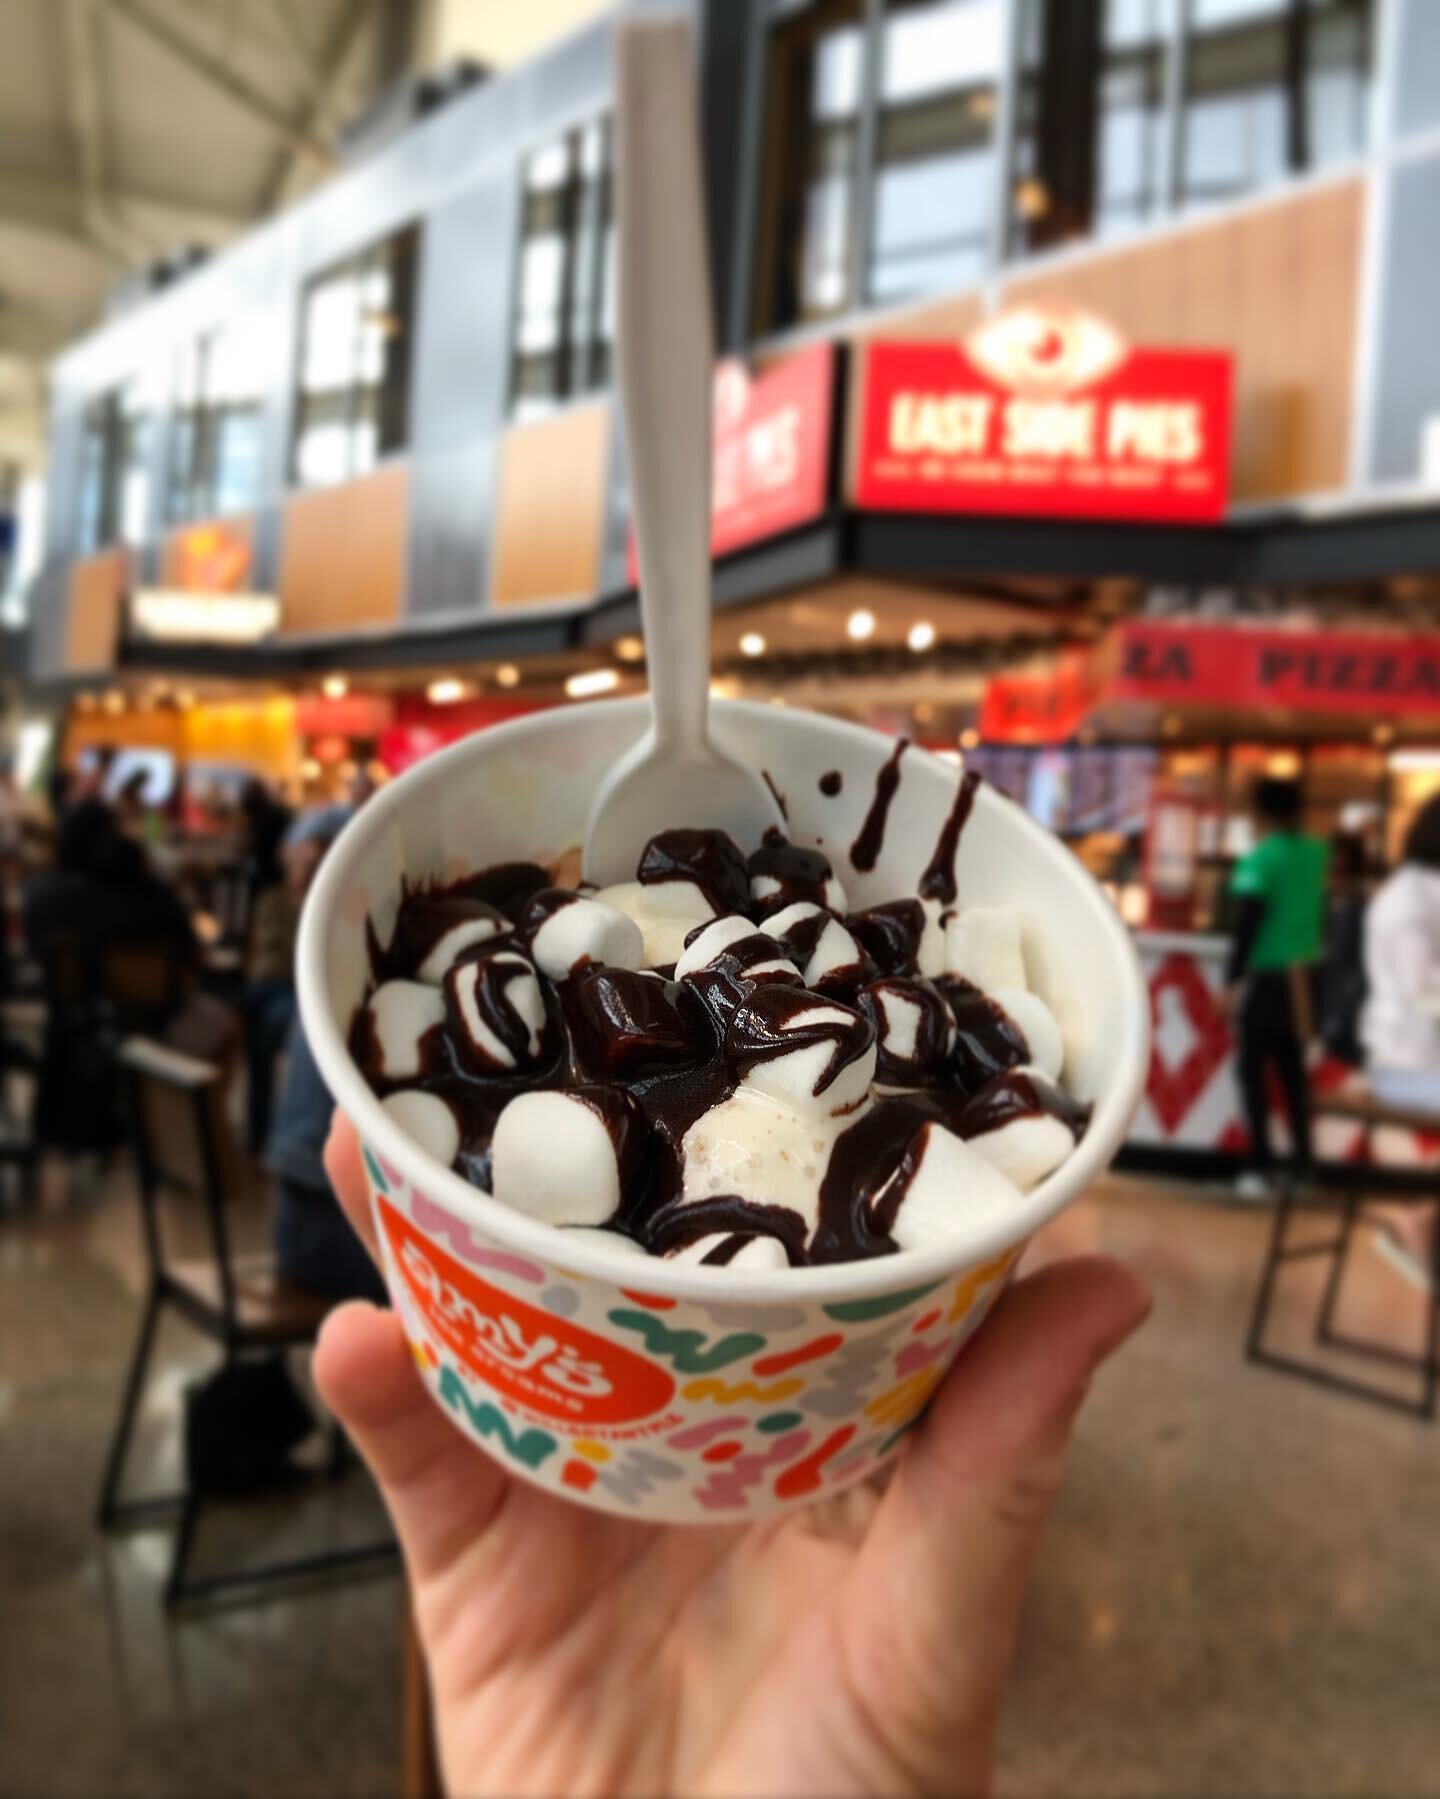 😎doing a little field test with some s&rsquo;mores flavor combo toppings at the Austin Airport; honey graham bear icecream, marshmallows, and hot fudge. Always trying to come up with new concepts!
*I remember as a child during the school year, my co